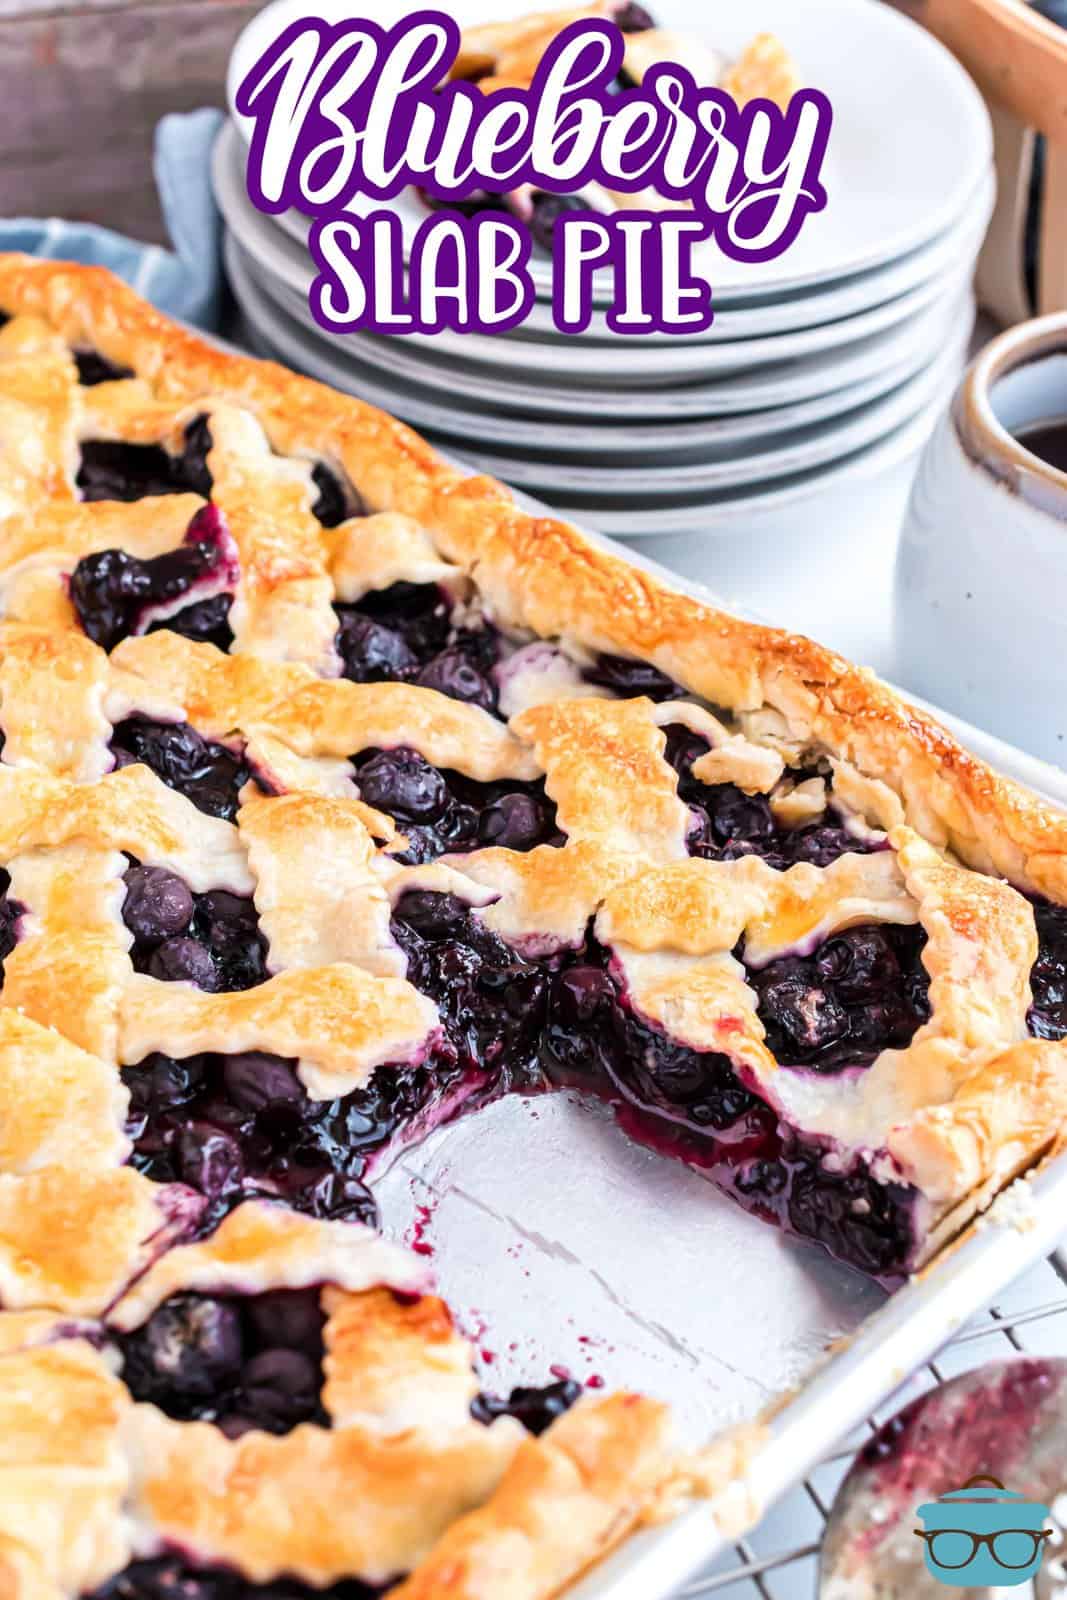 A sheet pan with a serving of Blueberry Slab Pie missing.